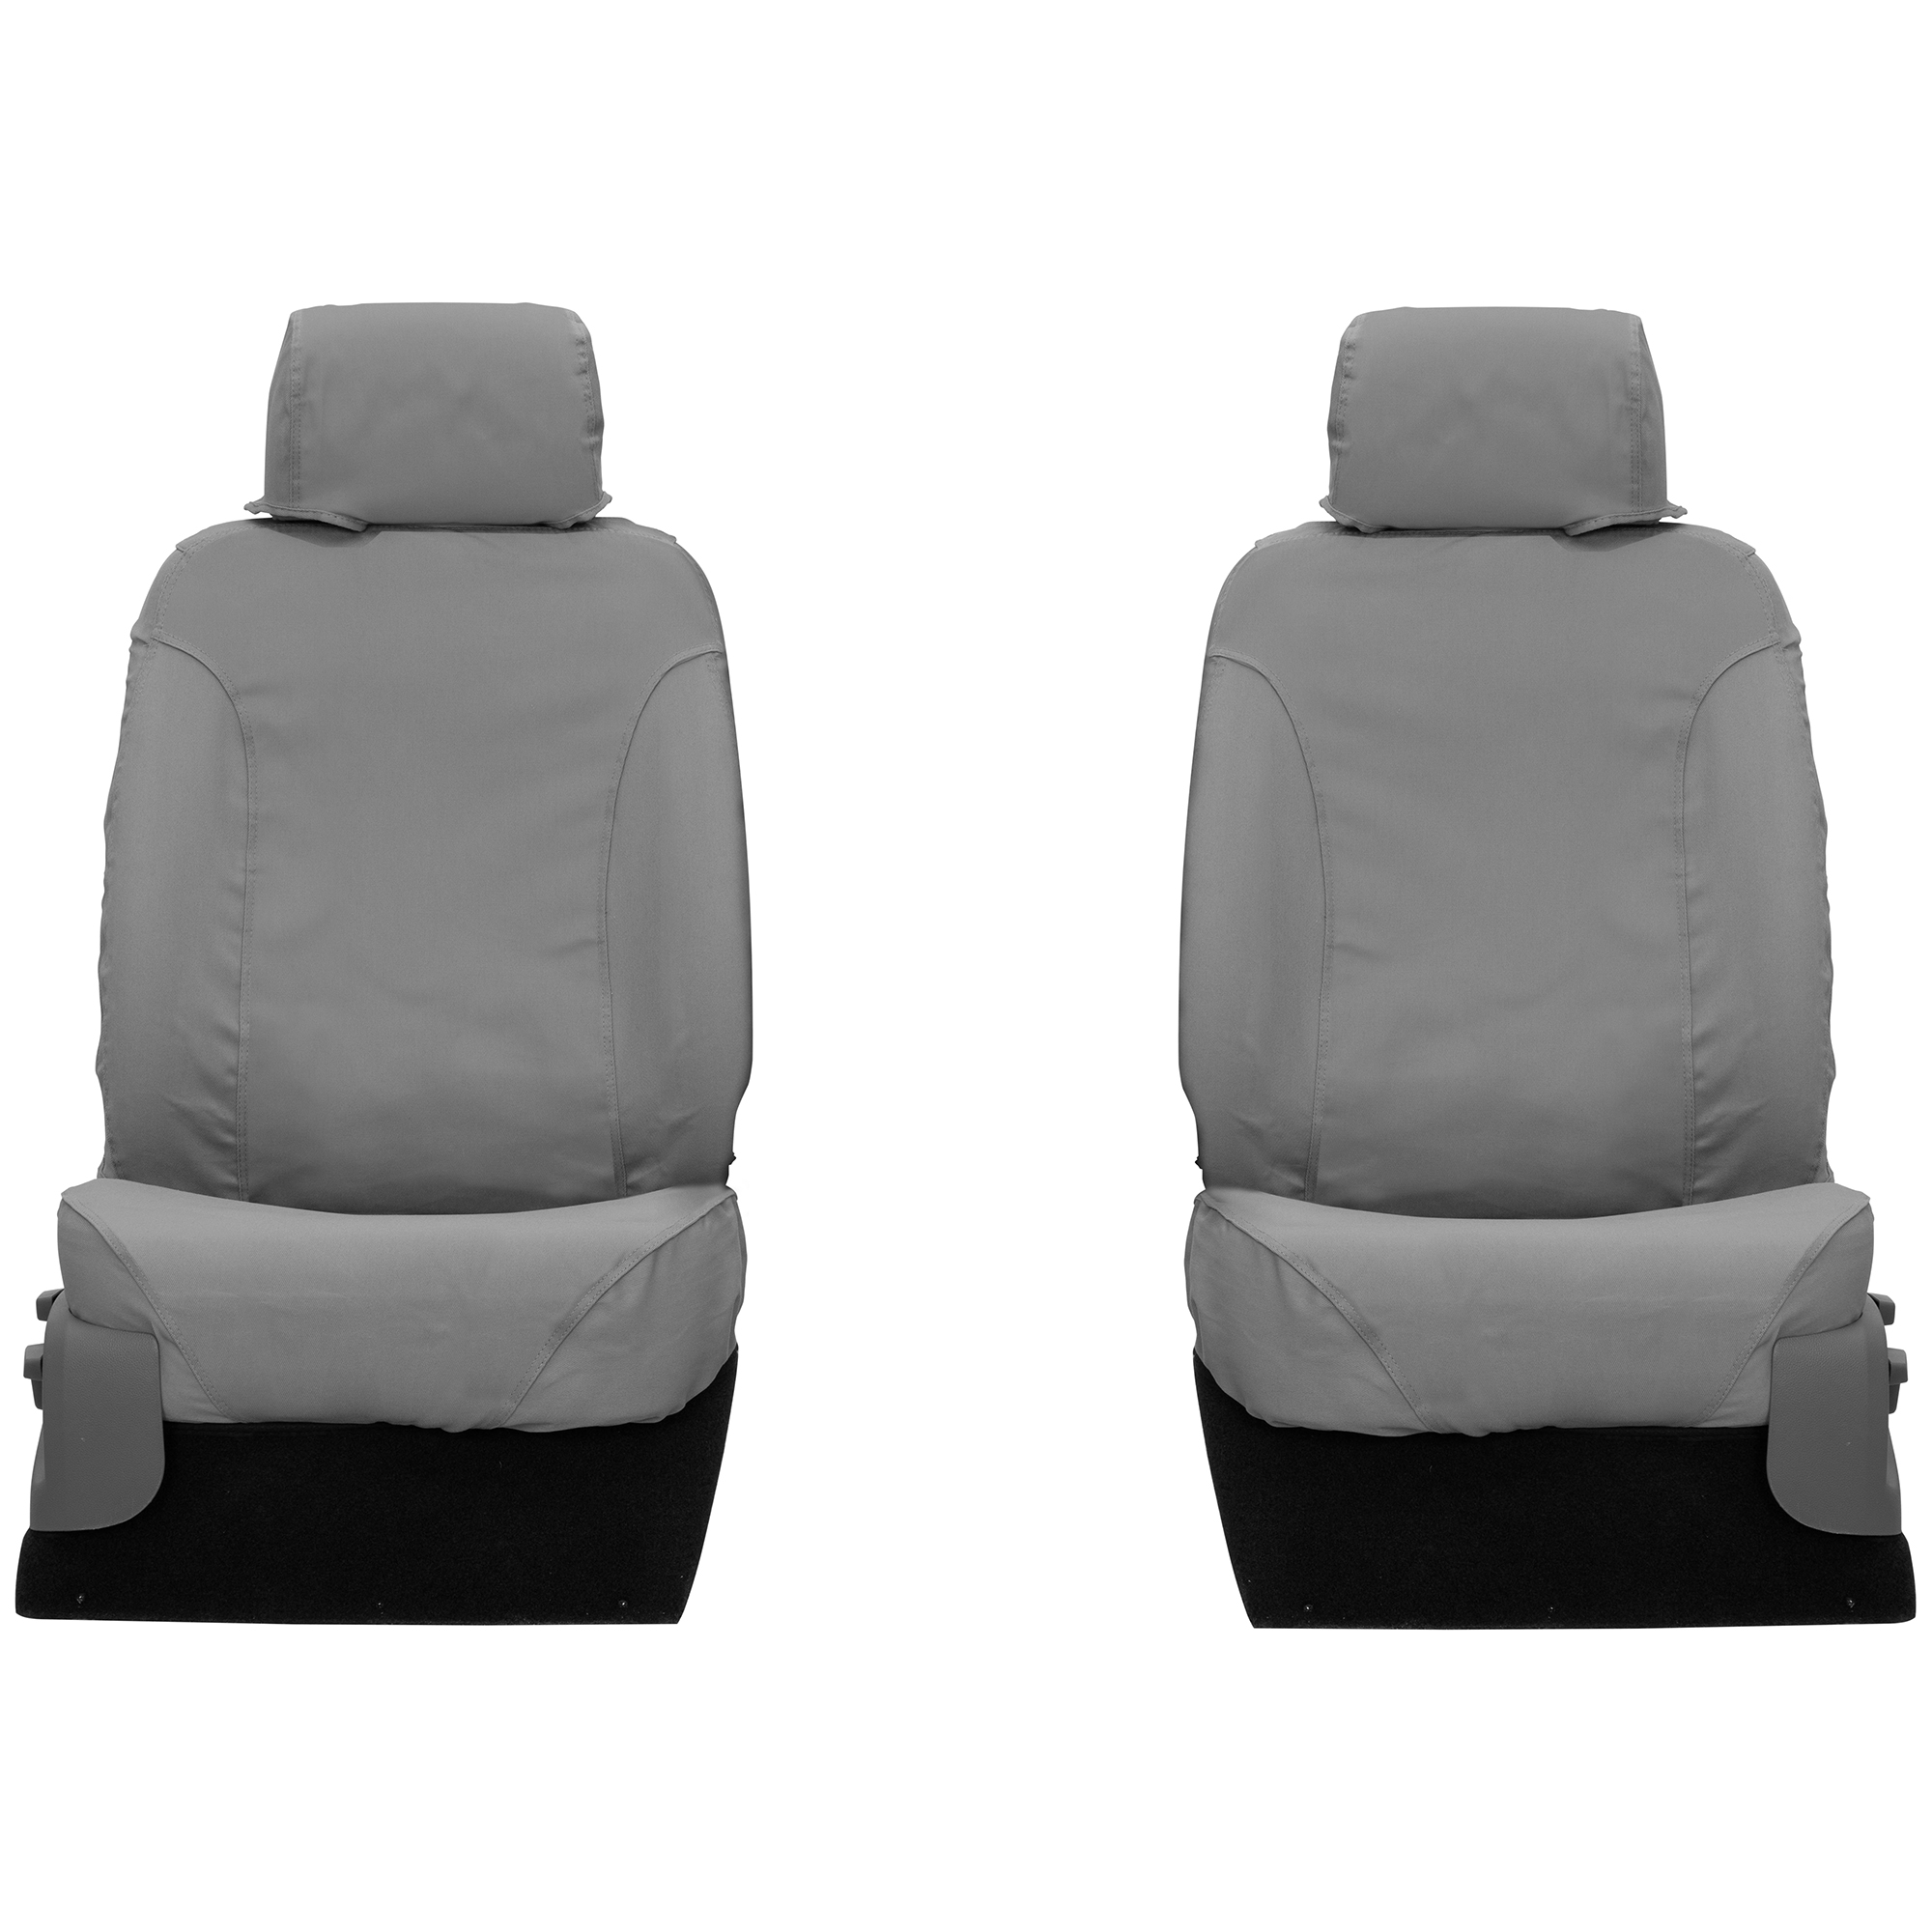 Covercraft SeatSaver Front Row Custom Fit Seat Cover for Select Cadillac/Chevrolet/GMC Models - Polycotton (Grey) Fits select: 2011 ,2013 CHEVROLET SILVERADO K1500 LT - image 1 of 2